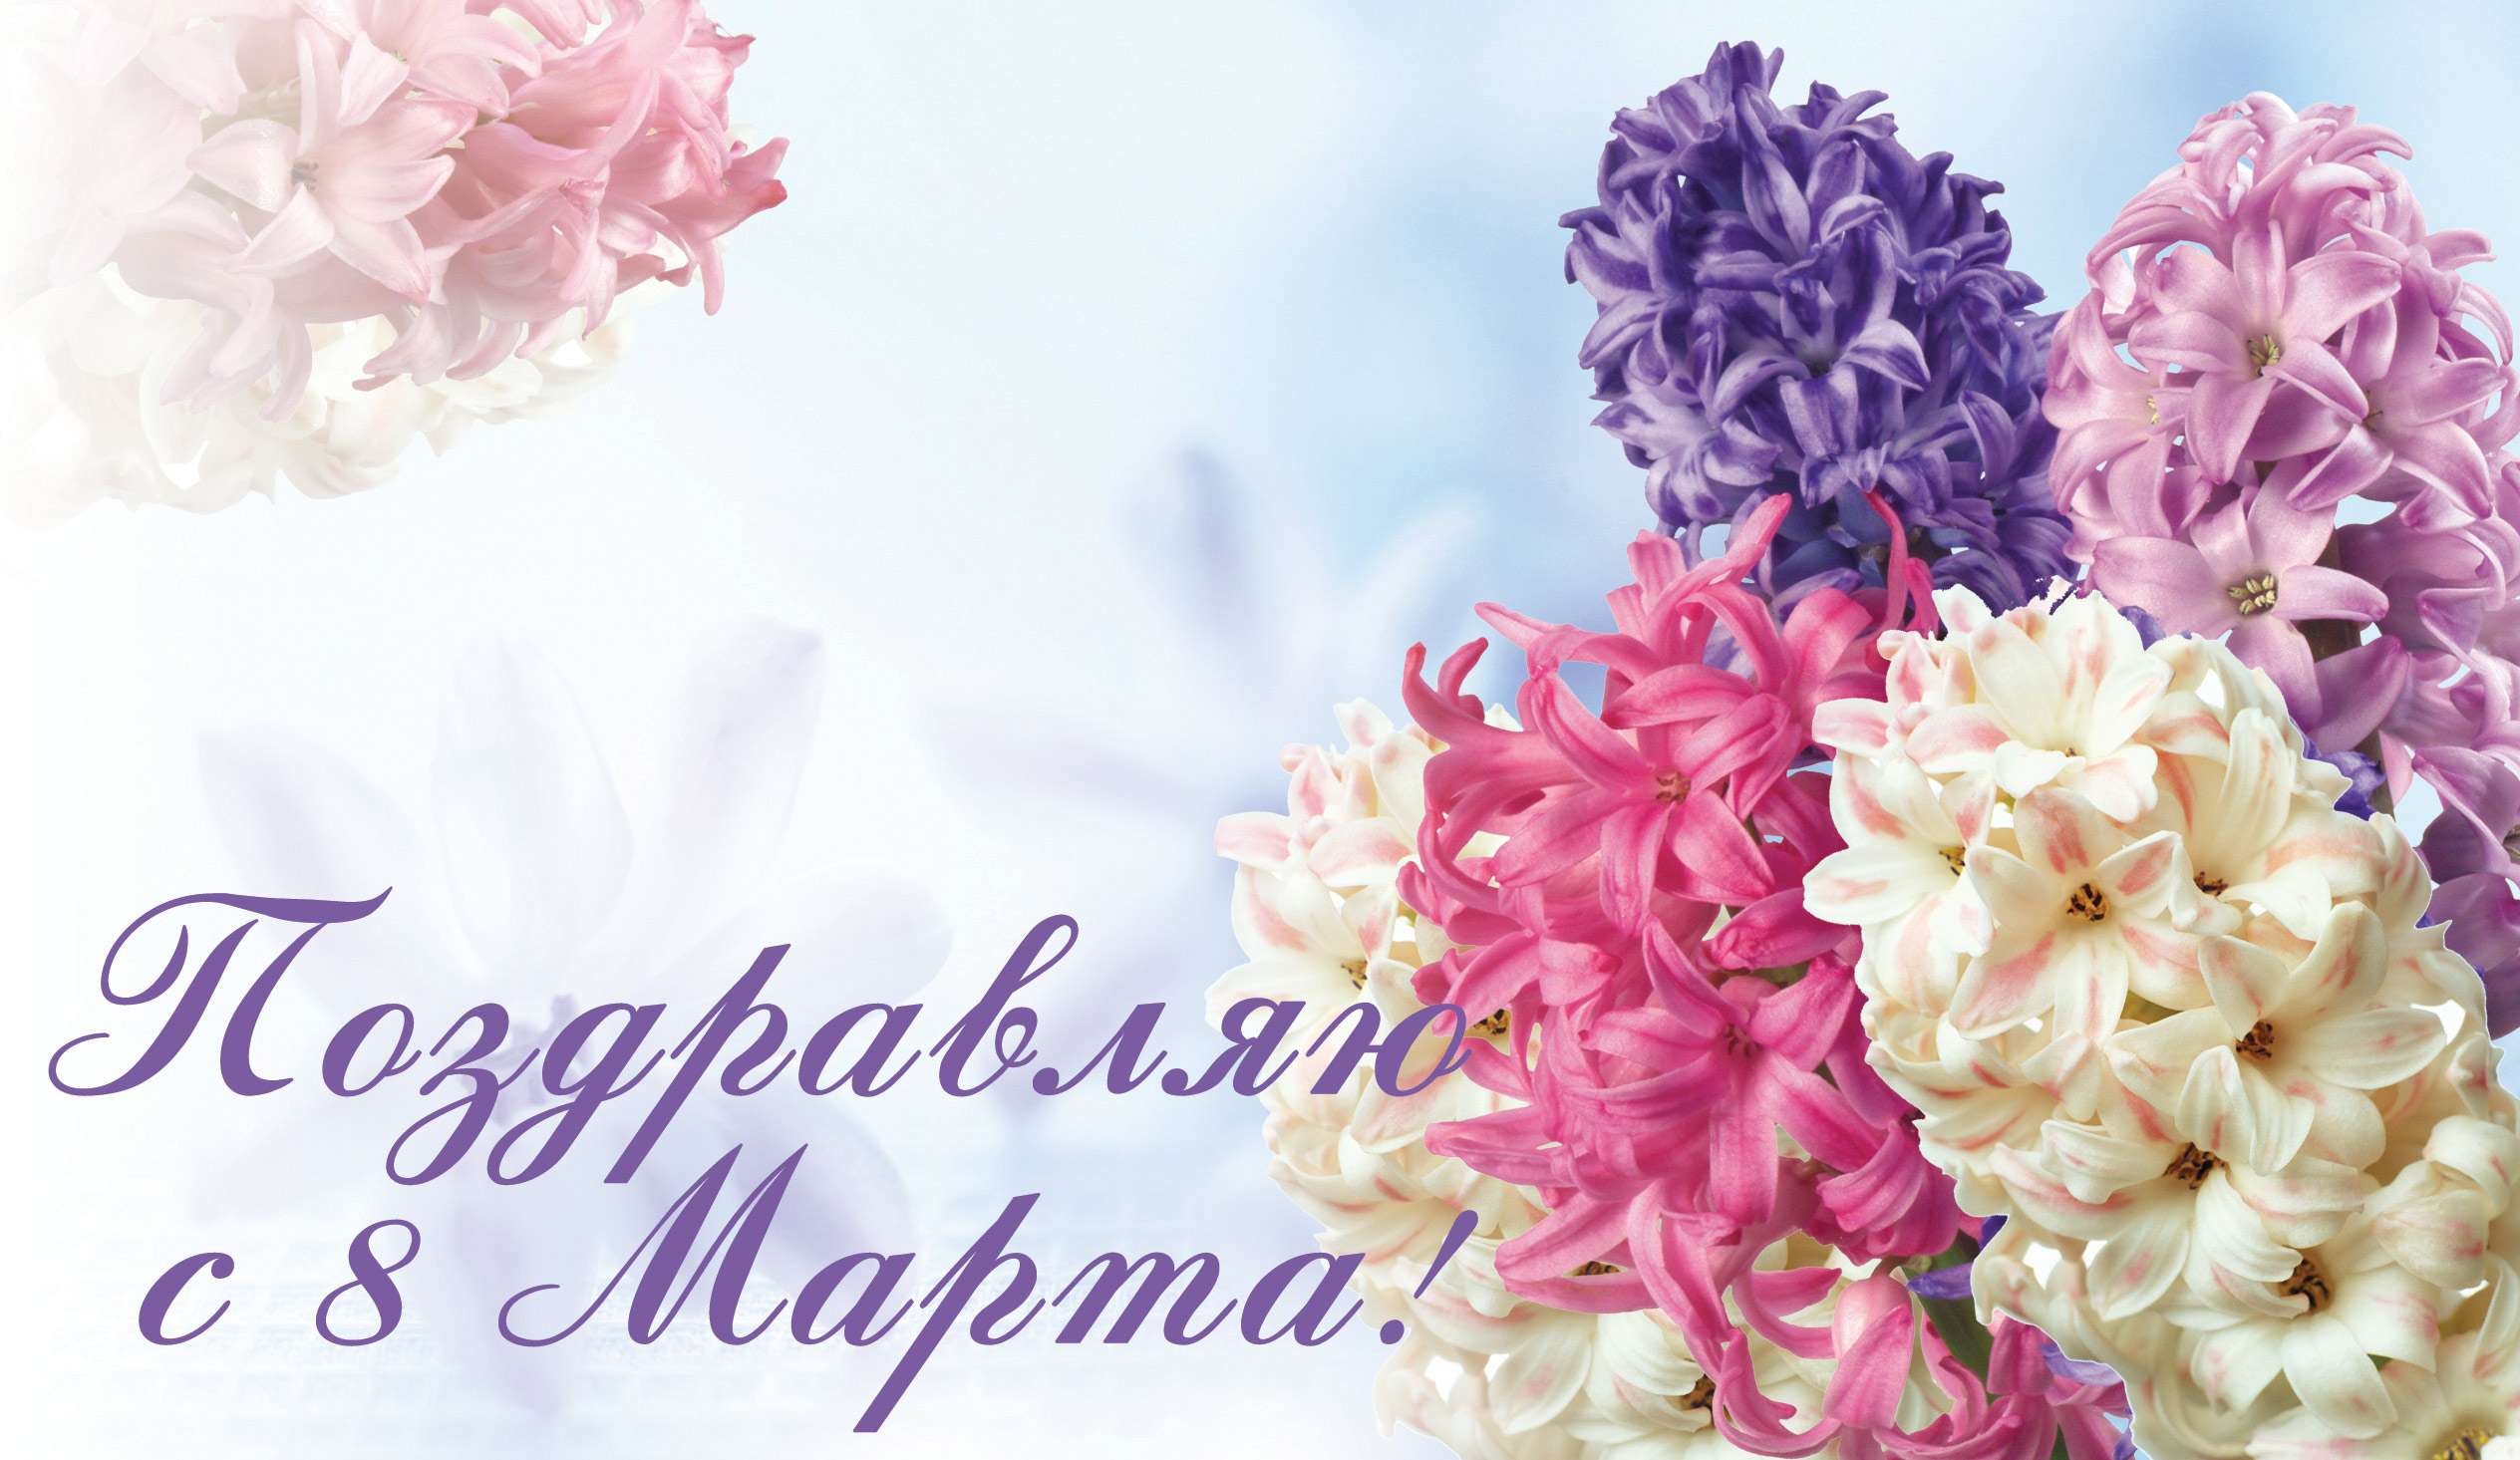 2018Holidays___International_Womens_Day_Greeting_card_with_spring_flowers_hyacinths_on_March_8_130557_